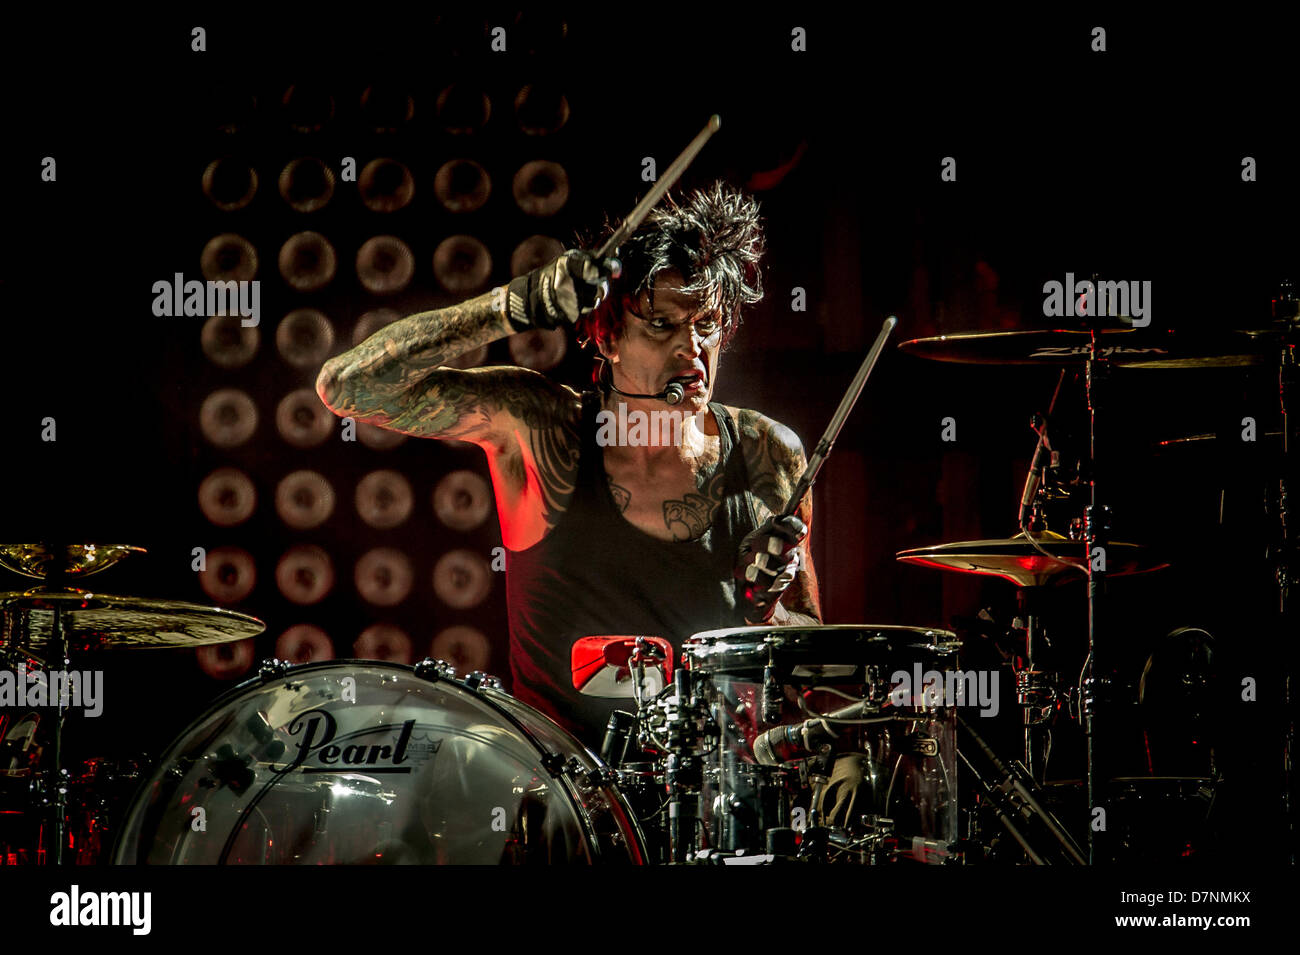 Toronto, Ontario, Canada. May 10, 2013. Drummer TOMMY LEE of Stock ...